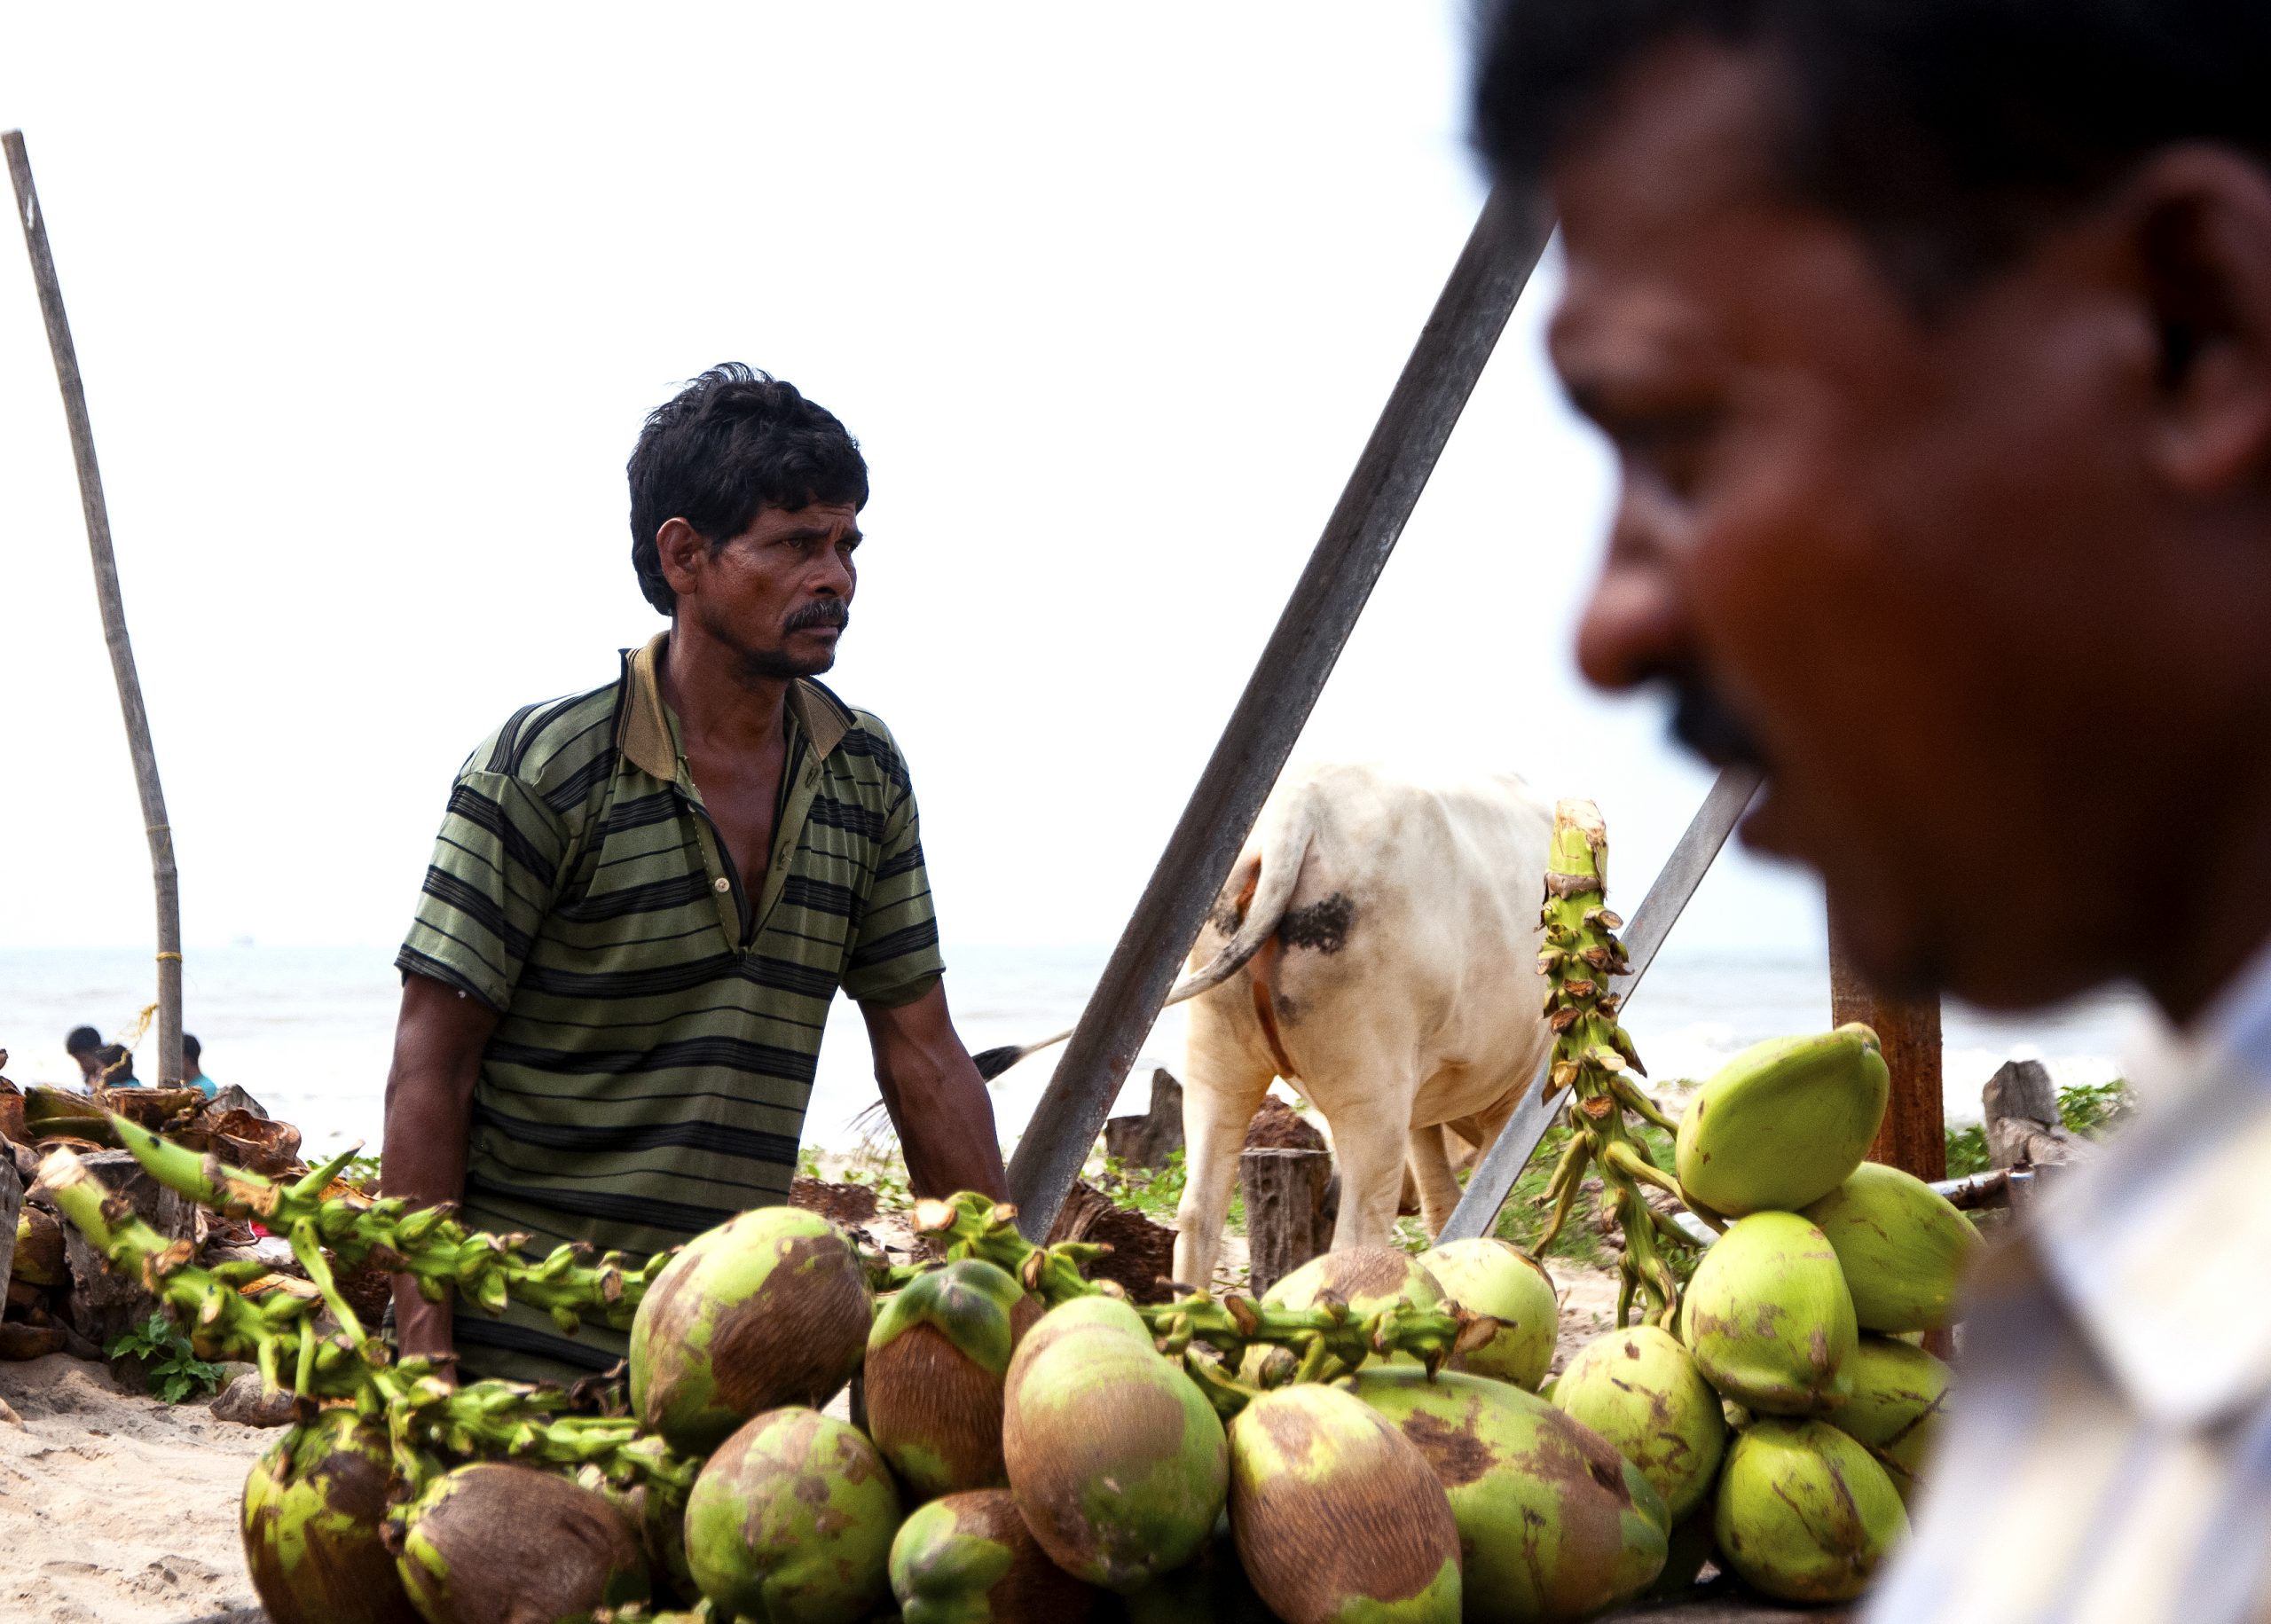 Man selling coconuts